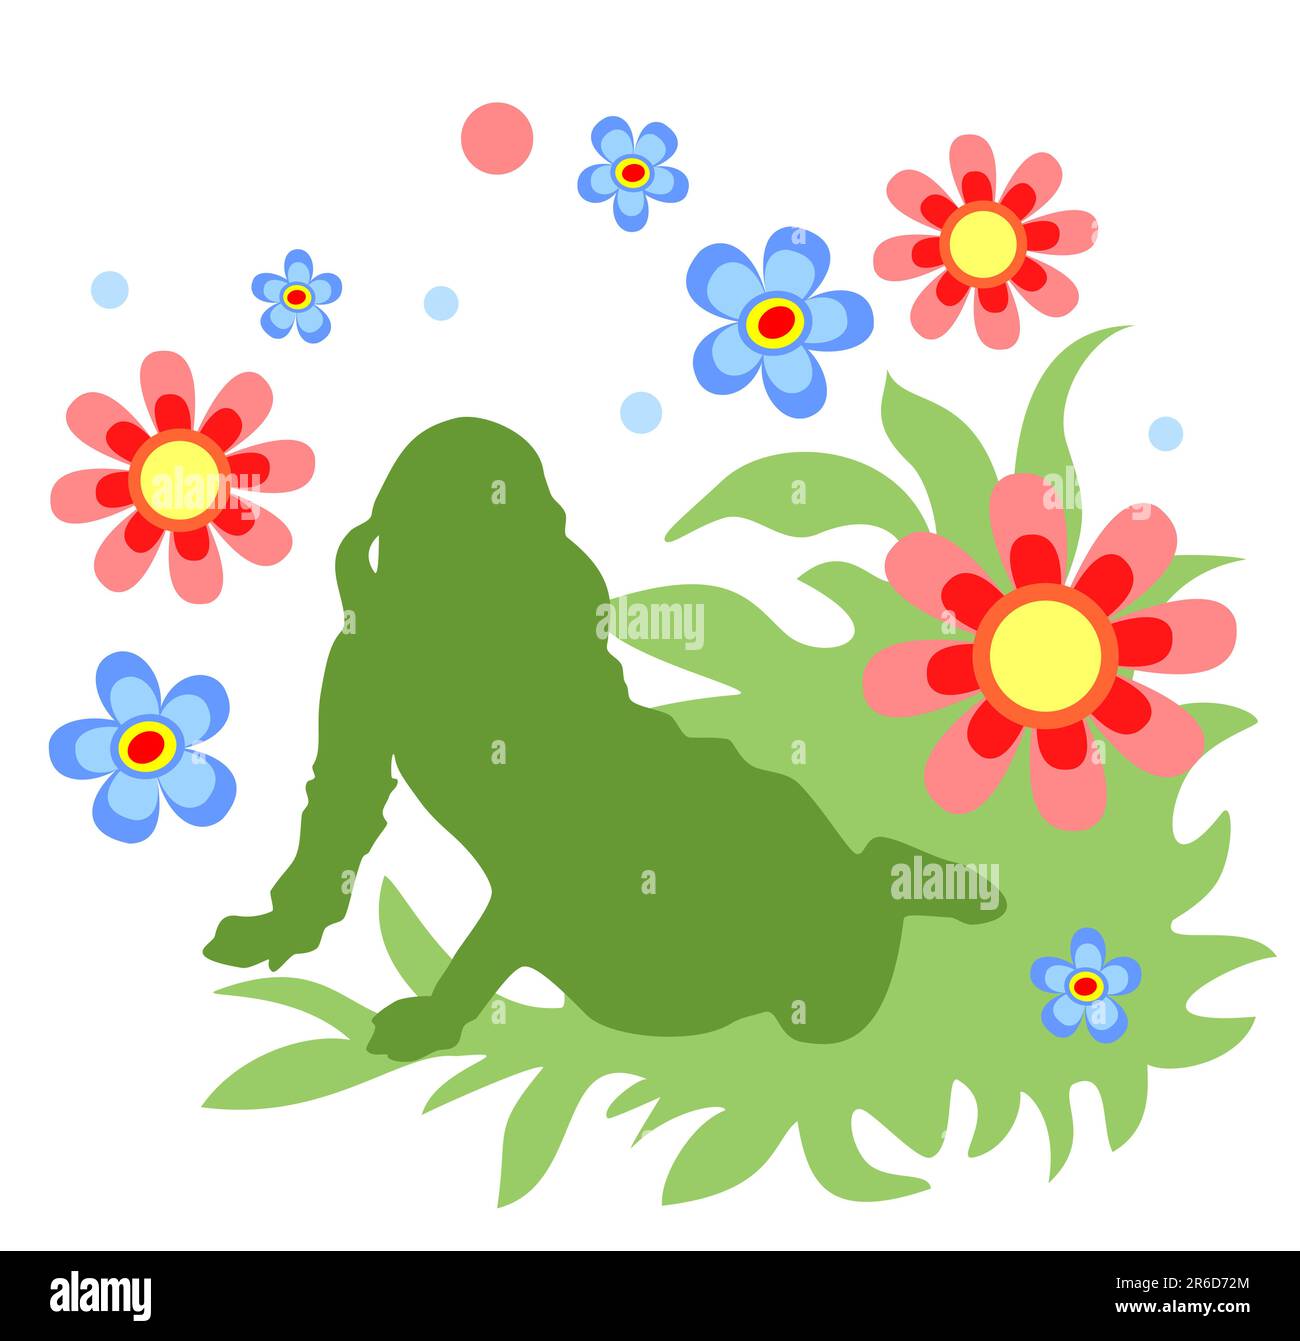 Sitting girl silhouette with flowers on a white background. Stock Vector